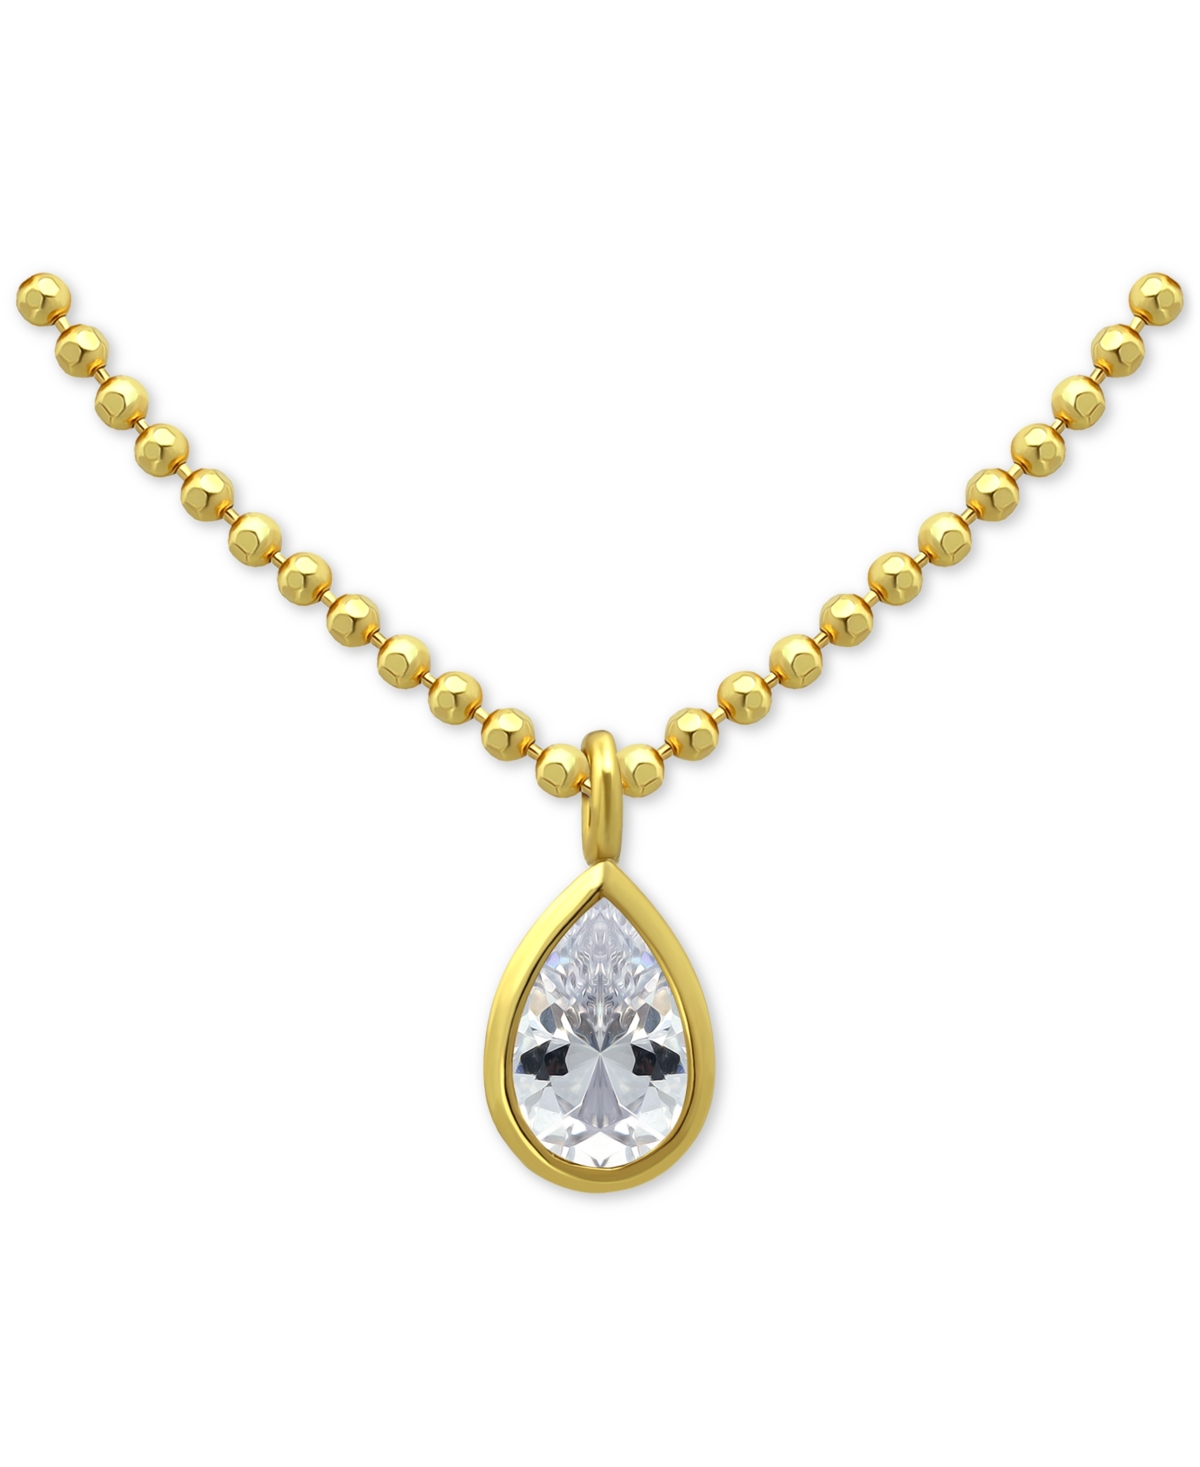 Cubic Zirconia Pear Bezel Pendant Necklace in 18k Gold-Plated Sterling Silver, 16" + 2" extender, Created for Macy's - Gold